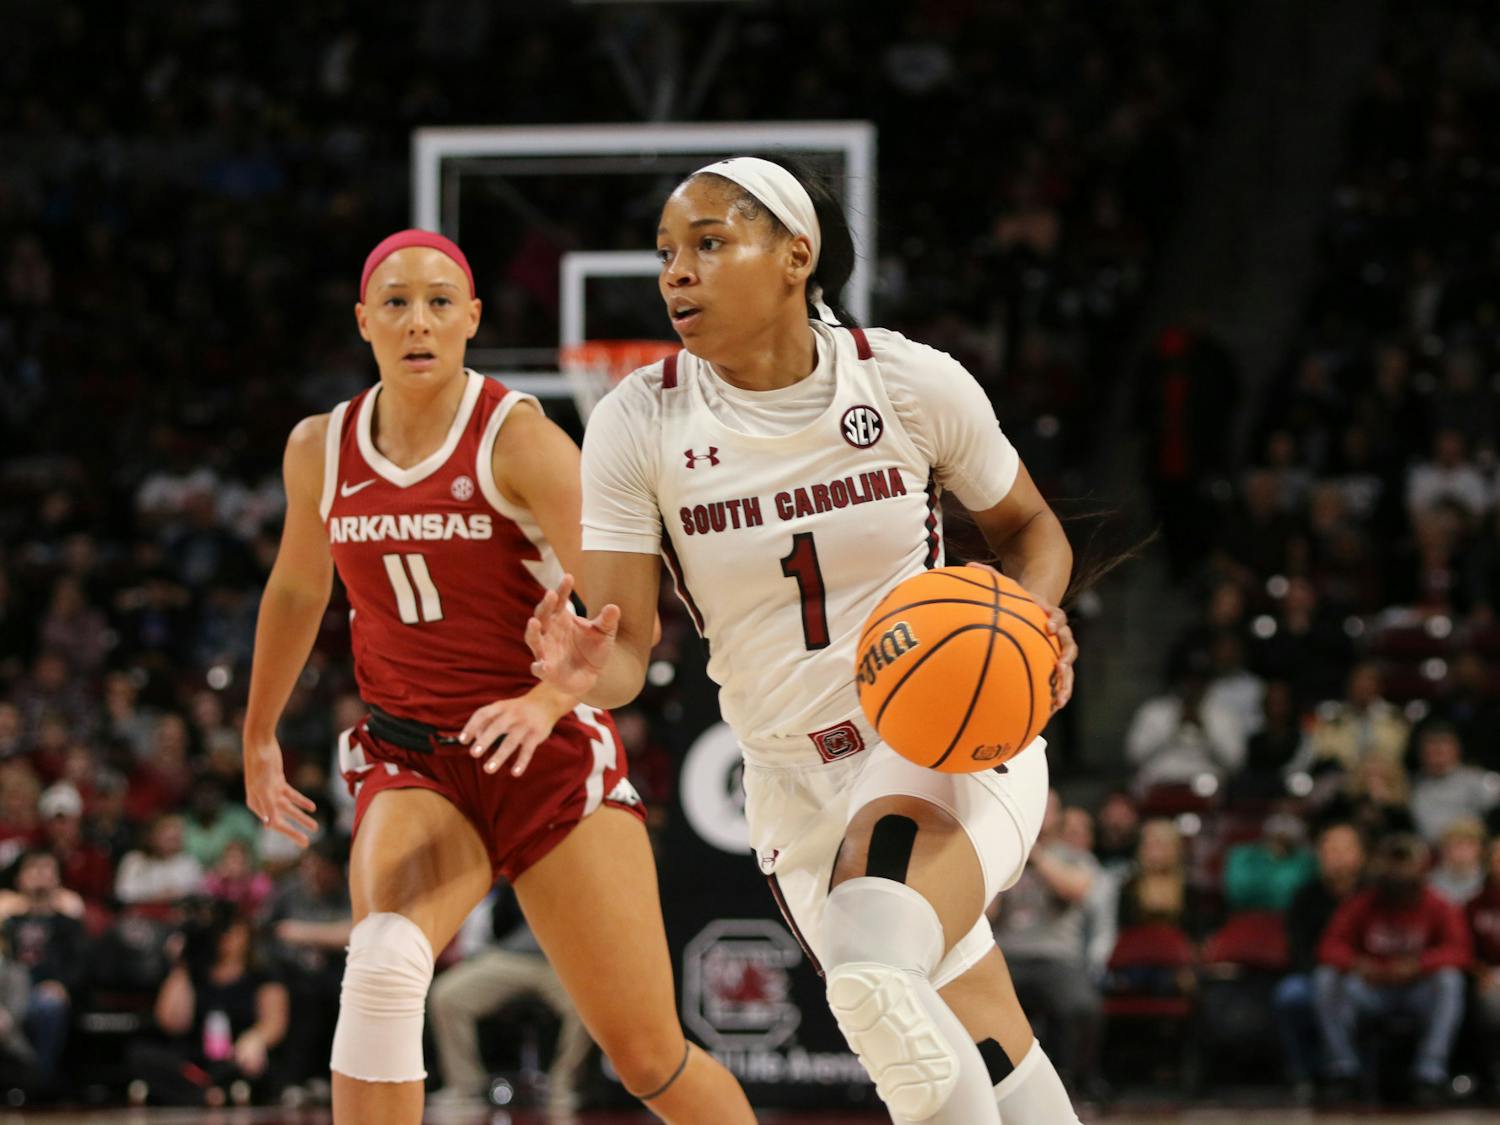 Senior guard Zia Cooke drives the ball downcourt on Jan. 22, 2023. The Gamecocks defeated Arkansas 92-46.&nbsp;